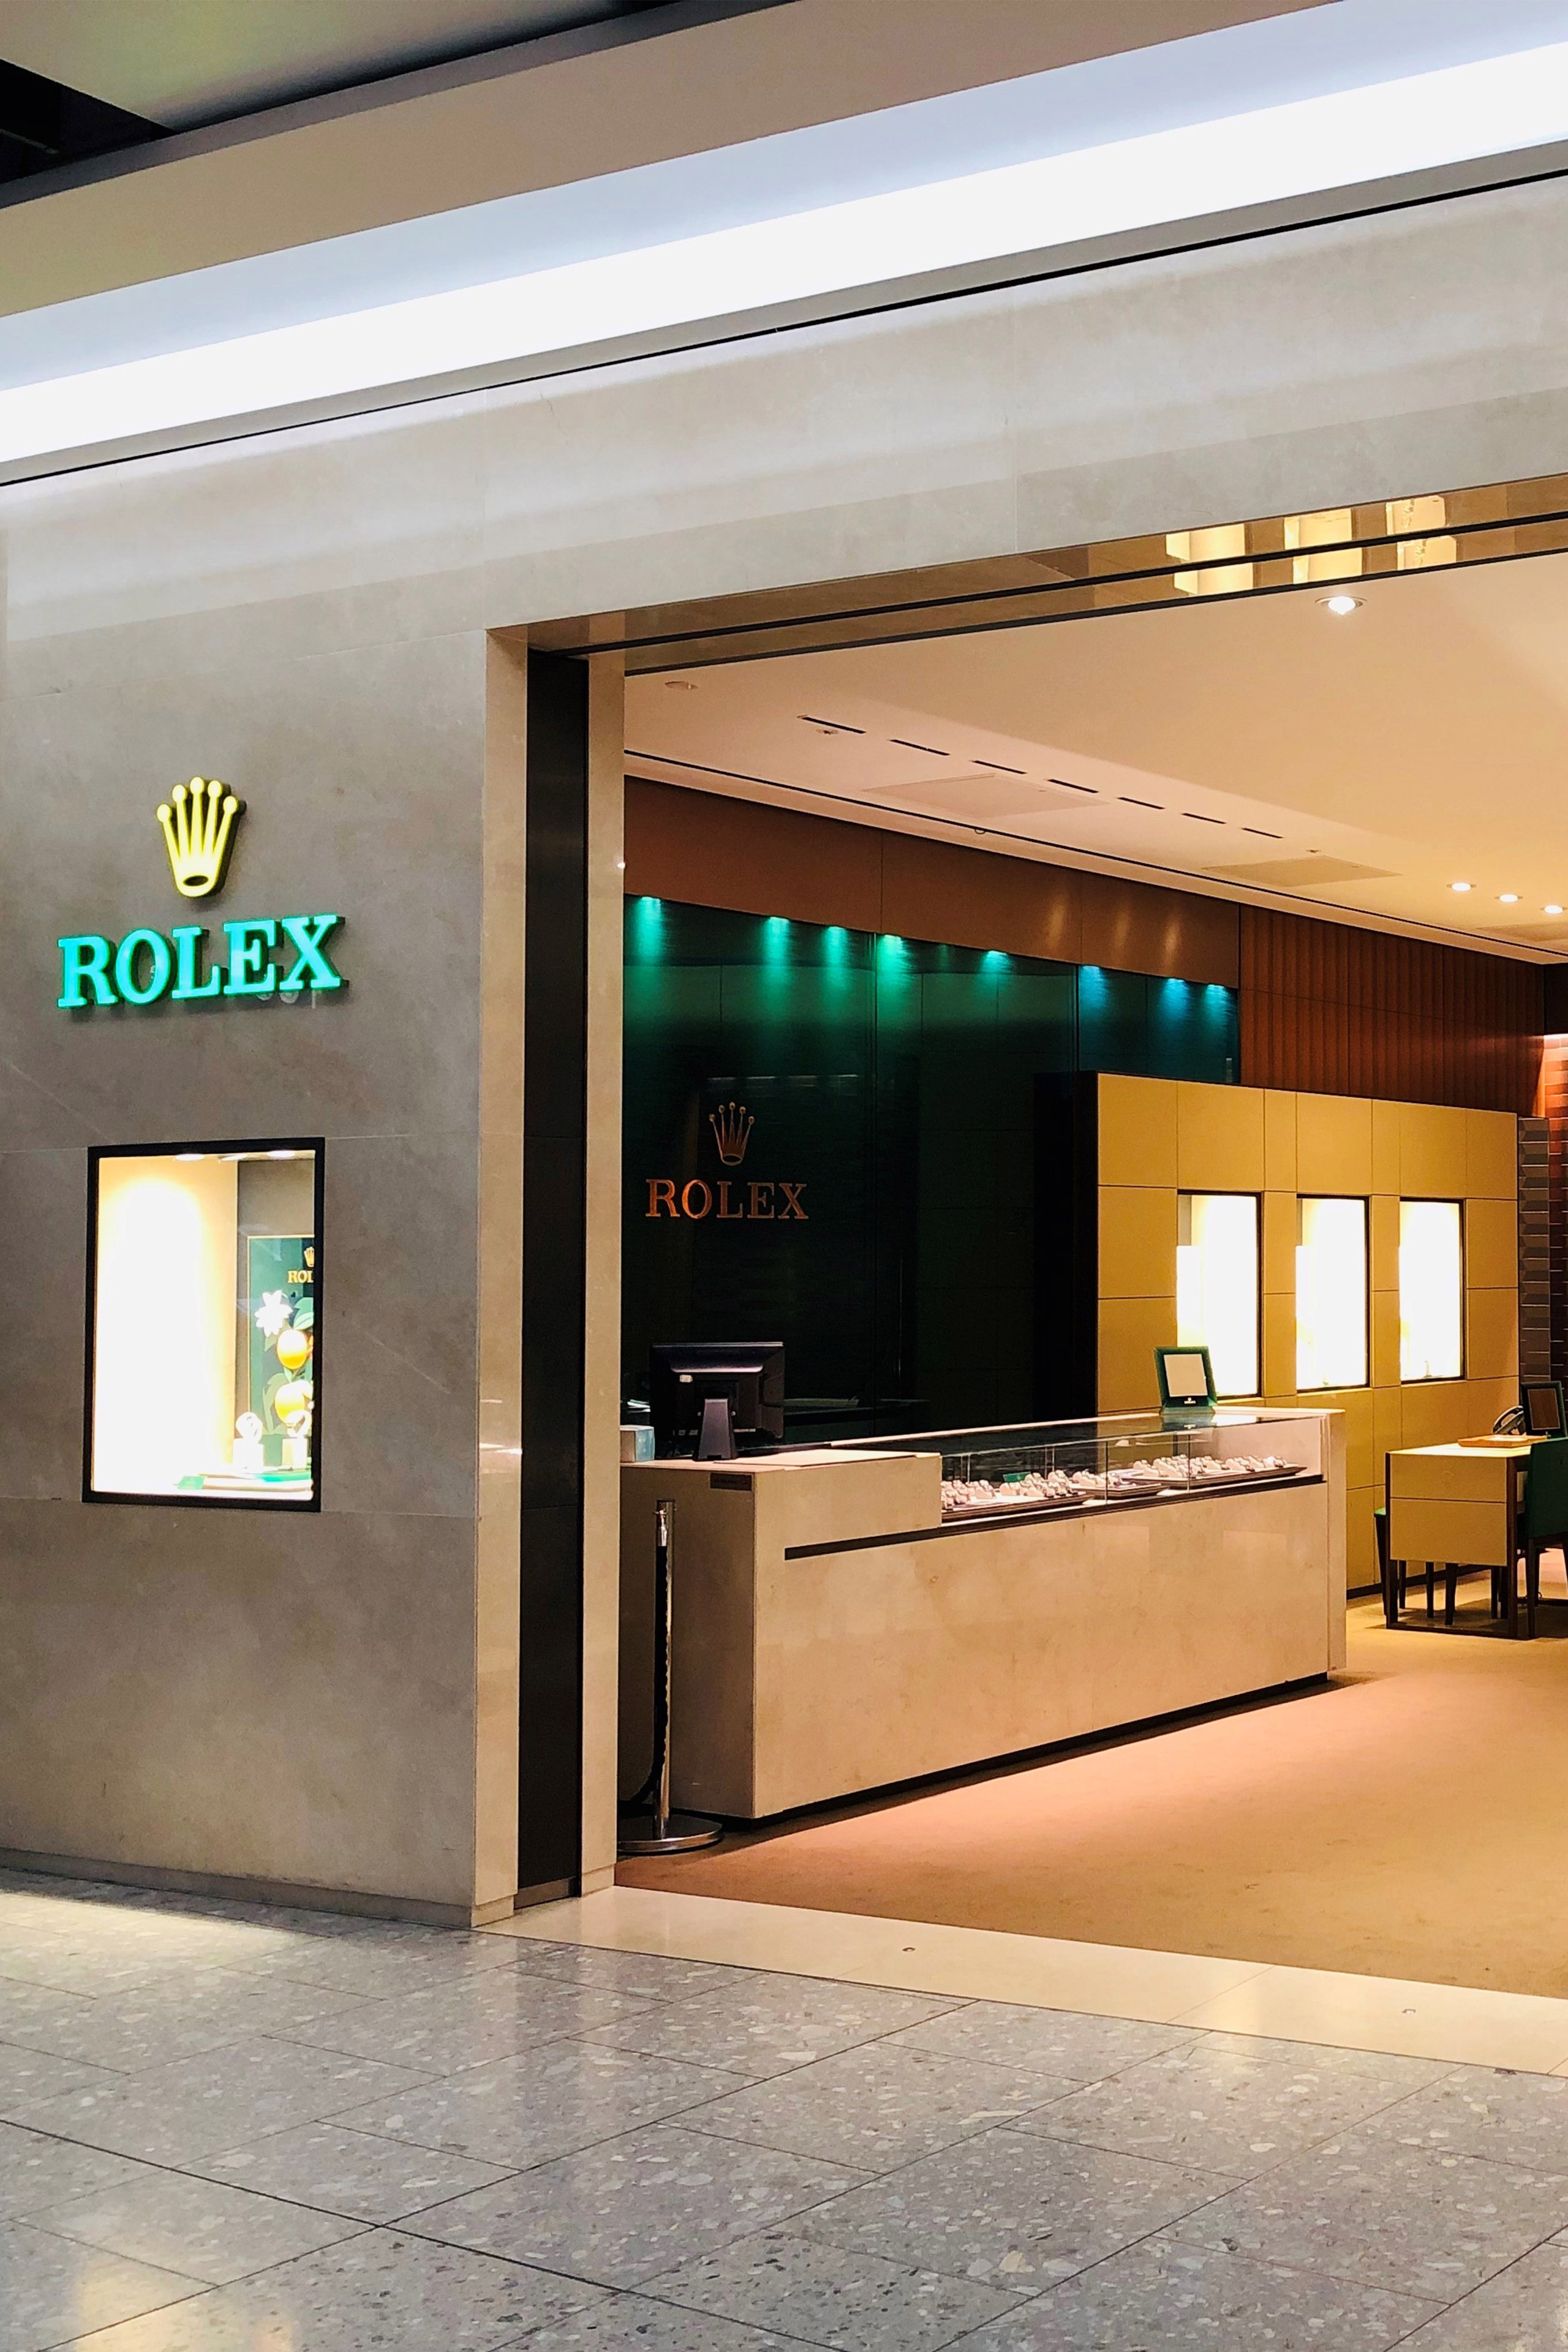 Rolex - Our brand partners - Group 